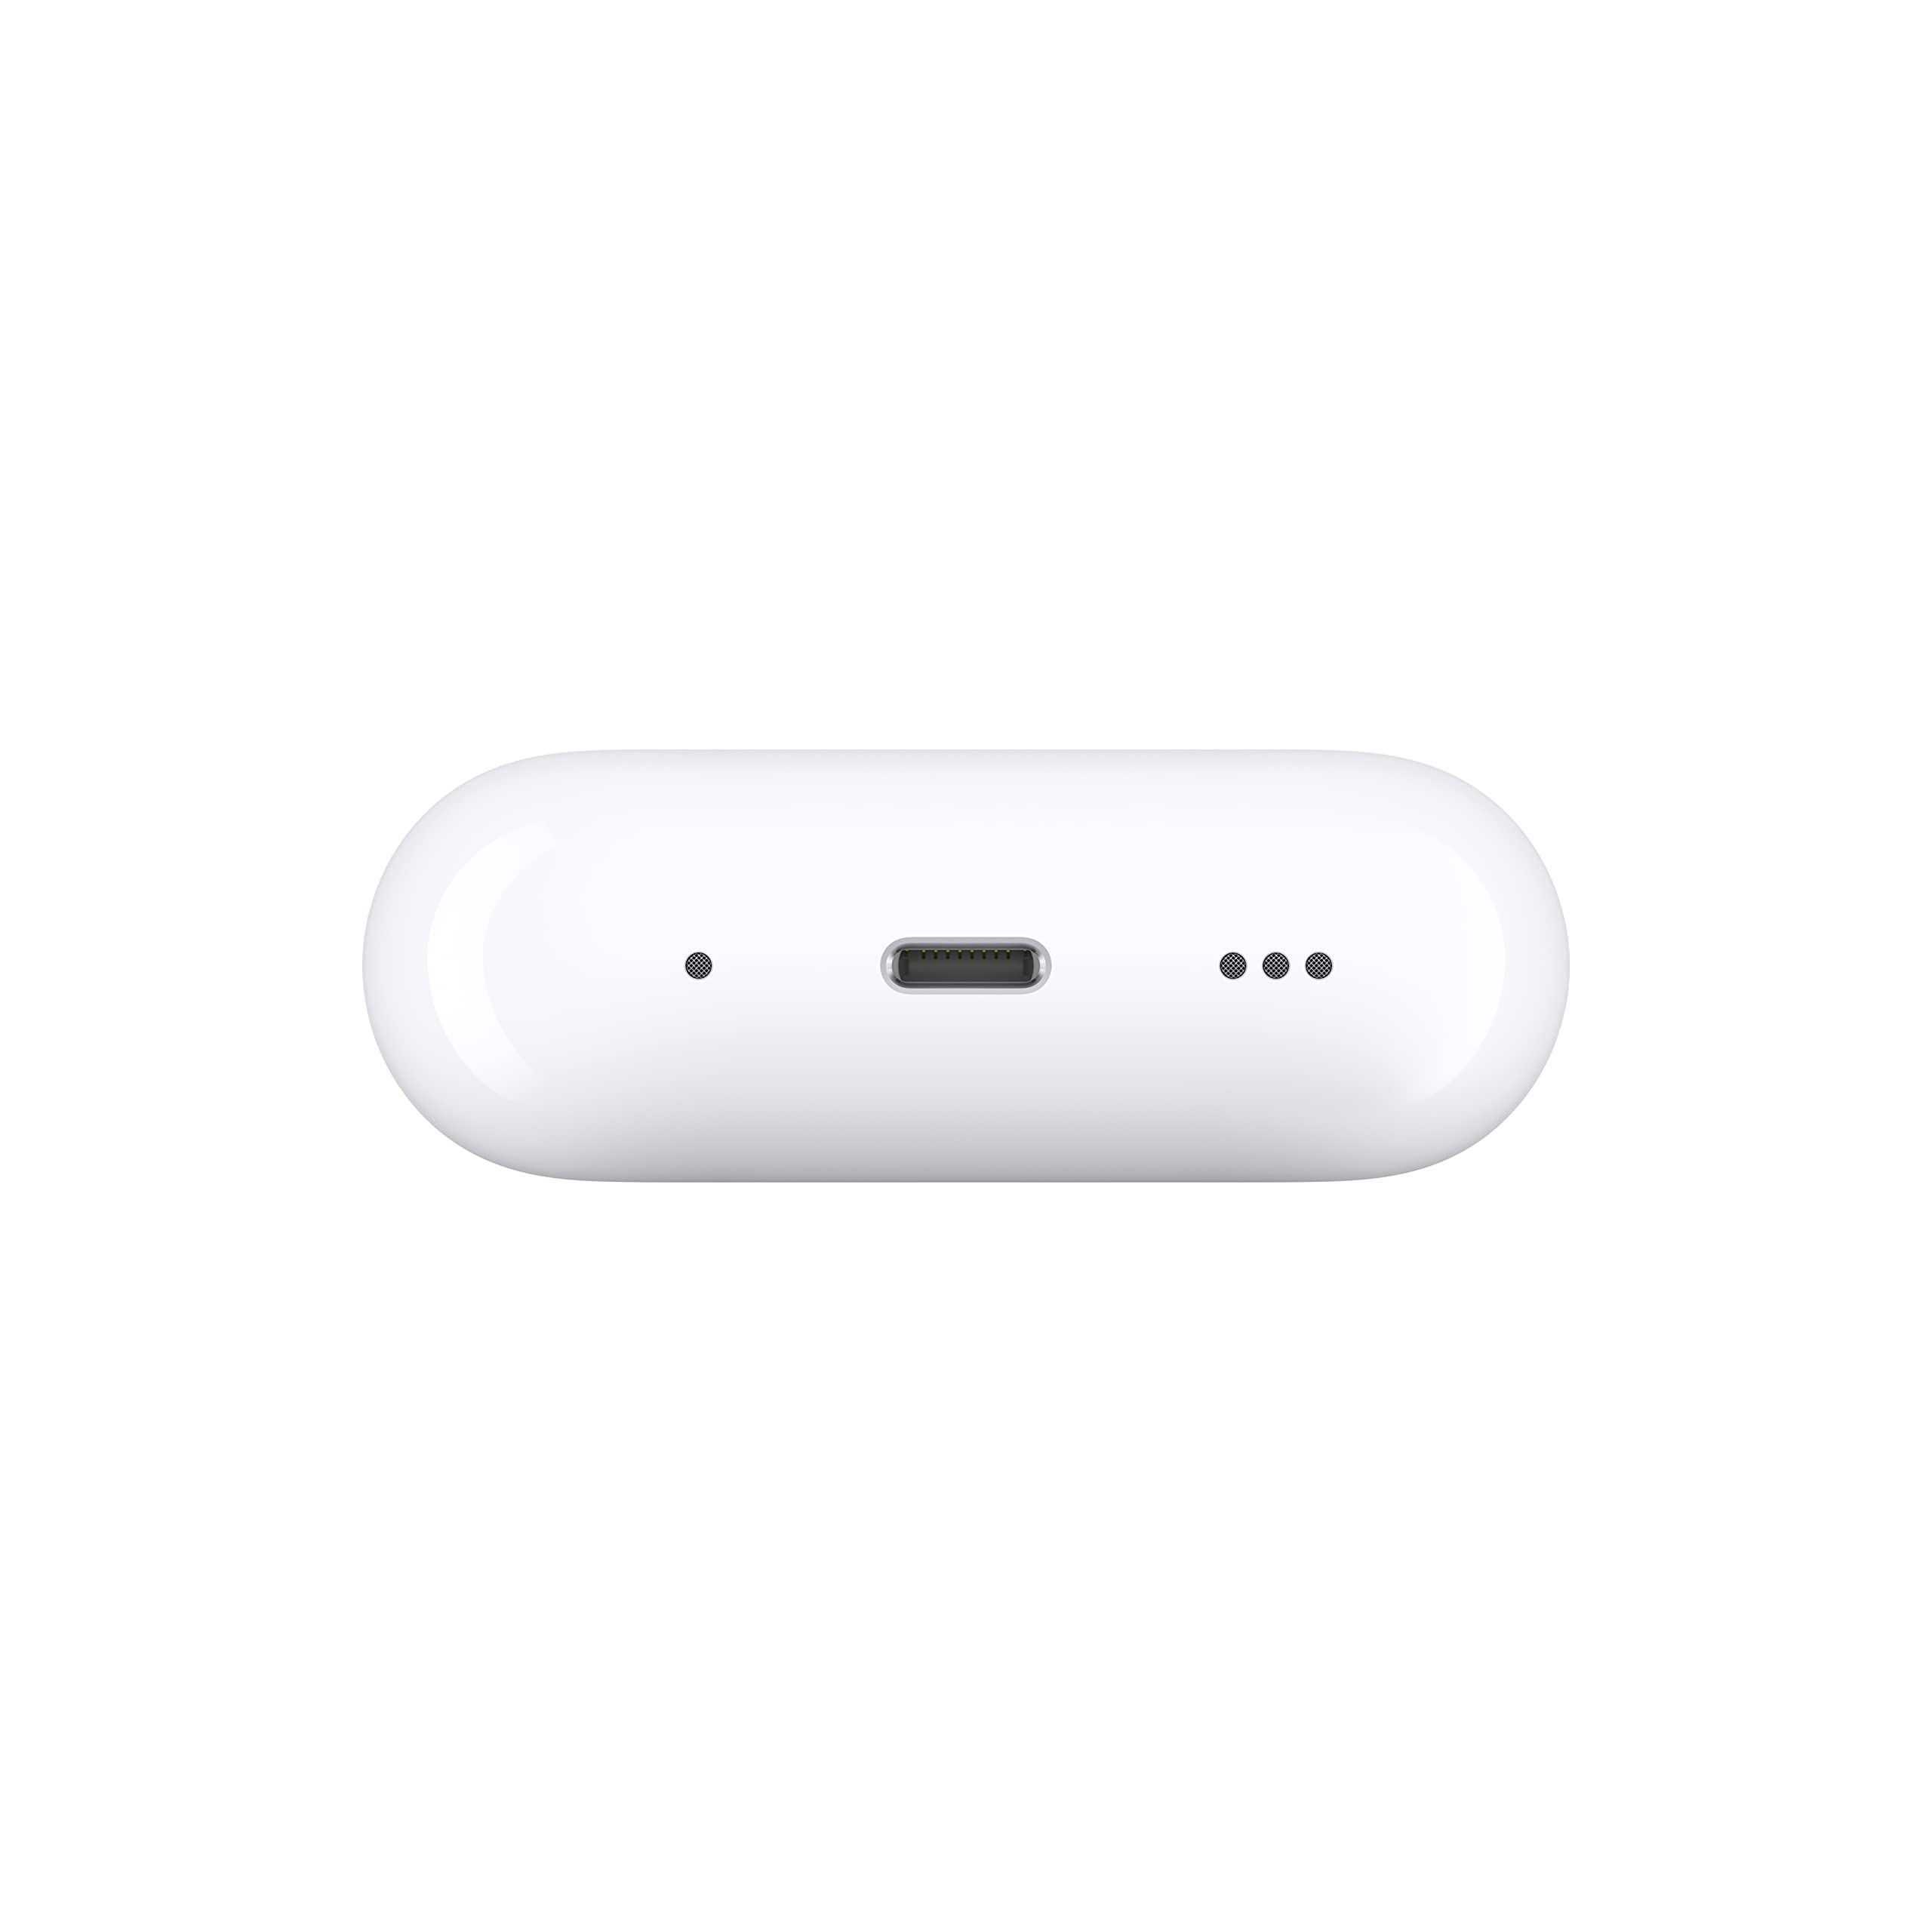 Apple AirPods Pro (2nd Generation) Wireless Earbuds with MagSafe